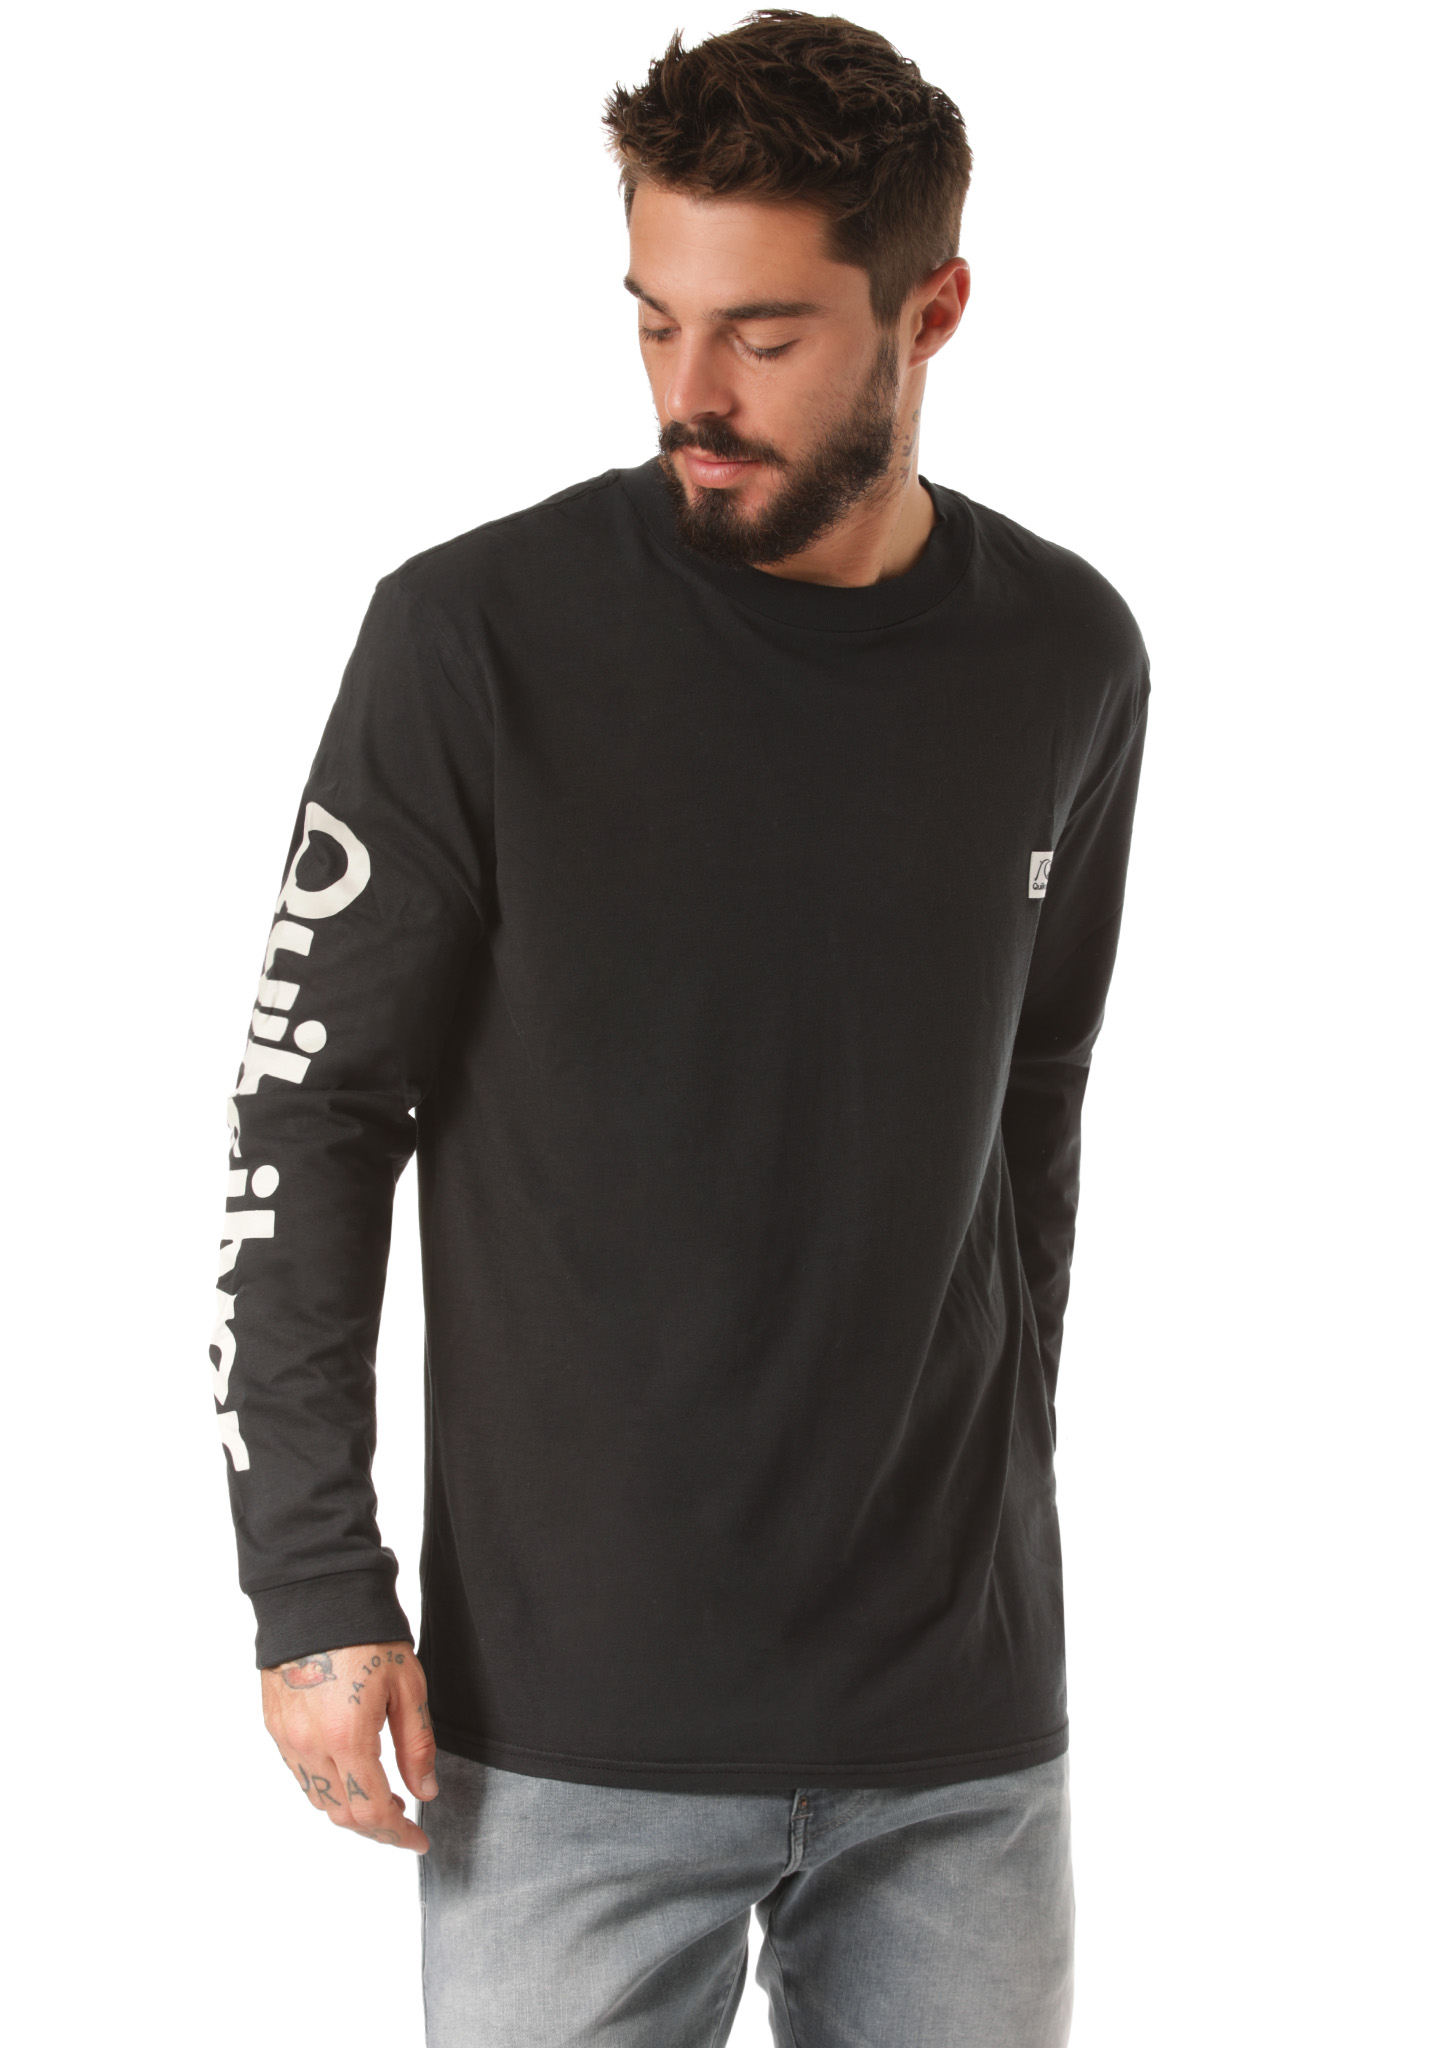 Quiksilver In The Middle Longsleeve black XS